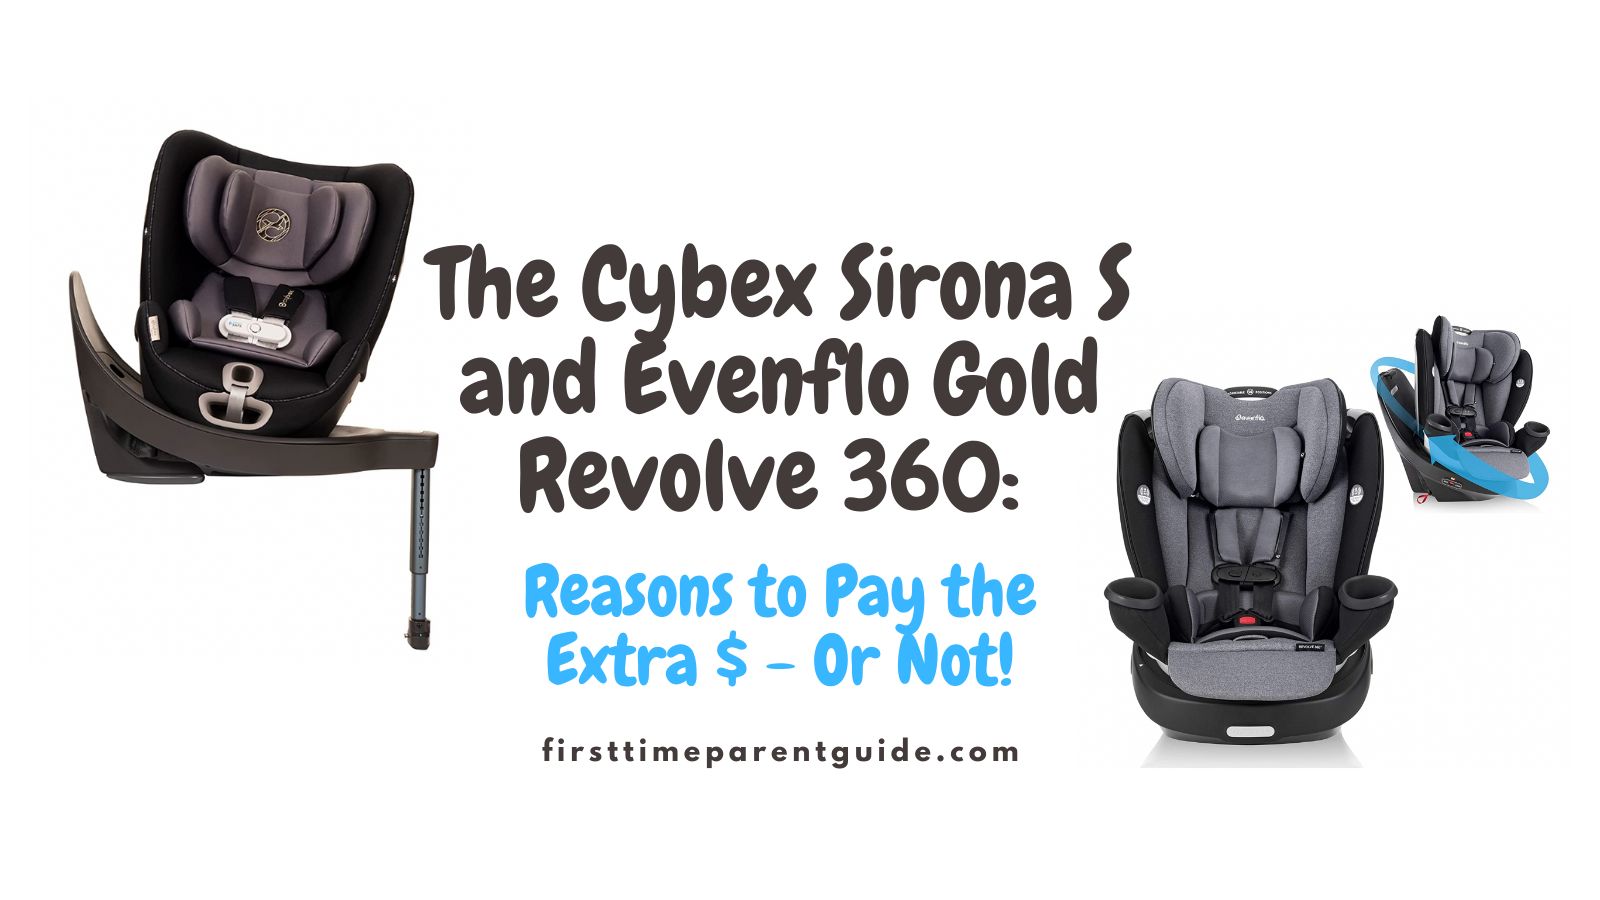 The Cybex Sirona S and